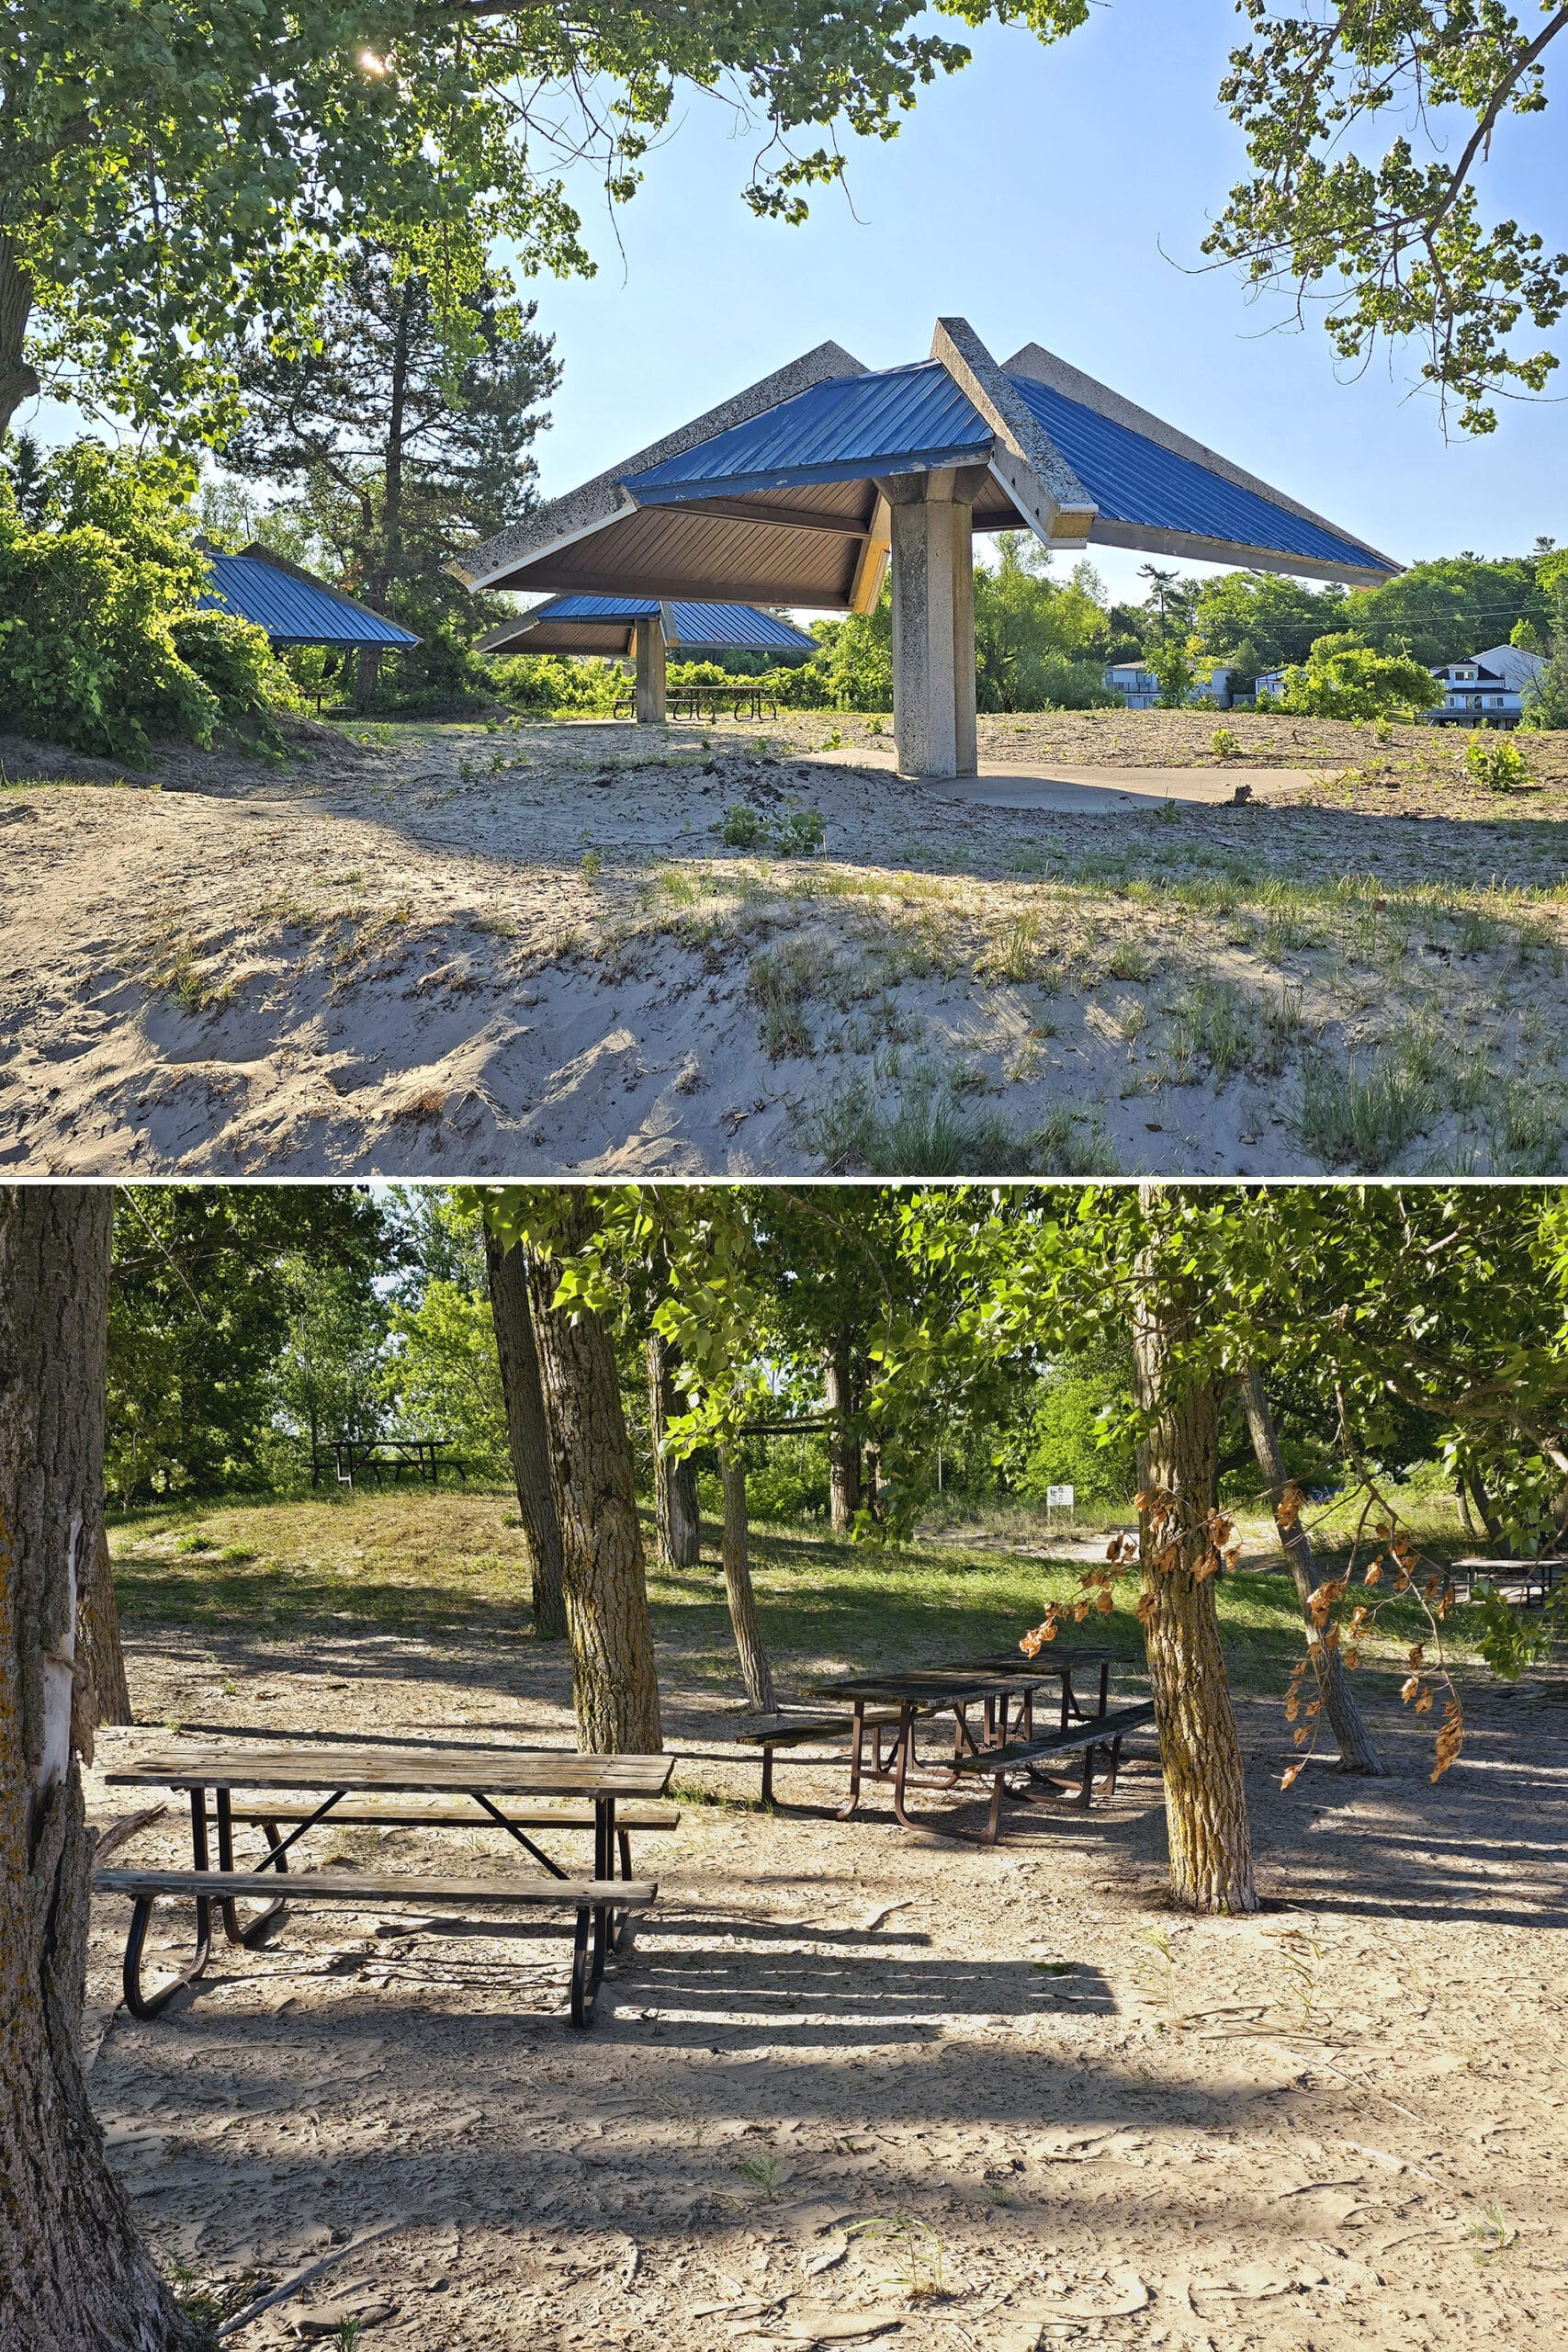 2 part image showing different options for picnicking at Wasaga Beach Area 1.